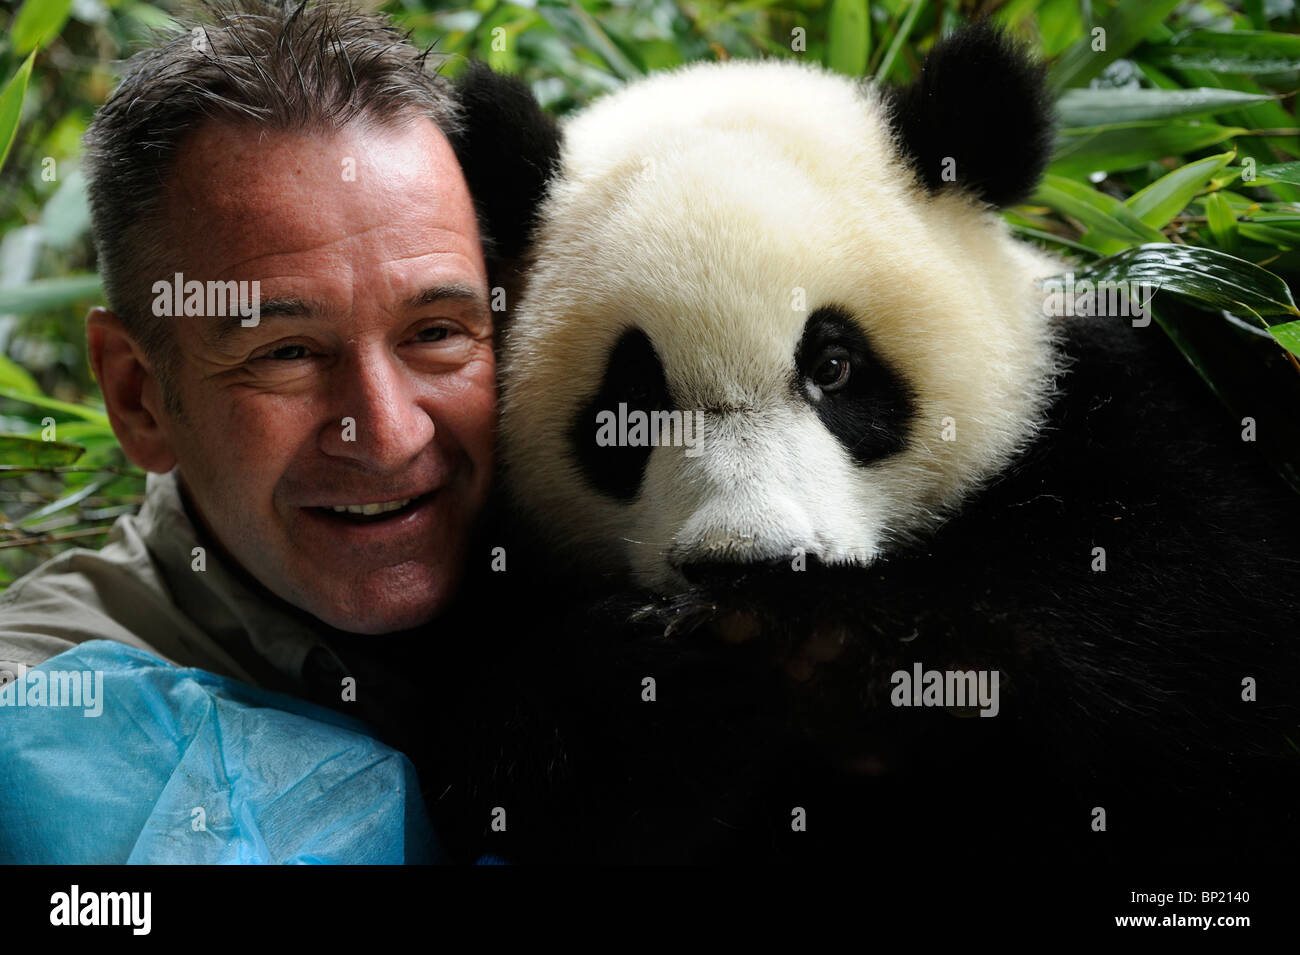 Wildlife presenter Nigel Marven poses with a one-year-old female panda called Yali at Chengdu Panda Base in Sichuan, China. 2010 Stock Photo